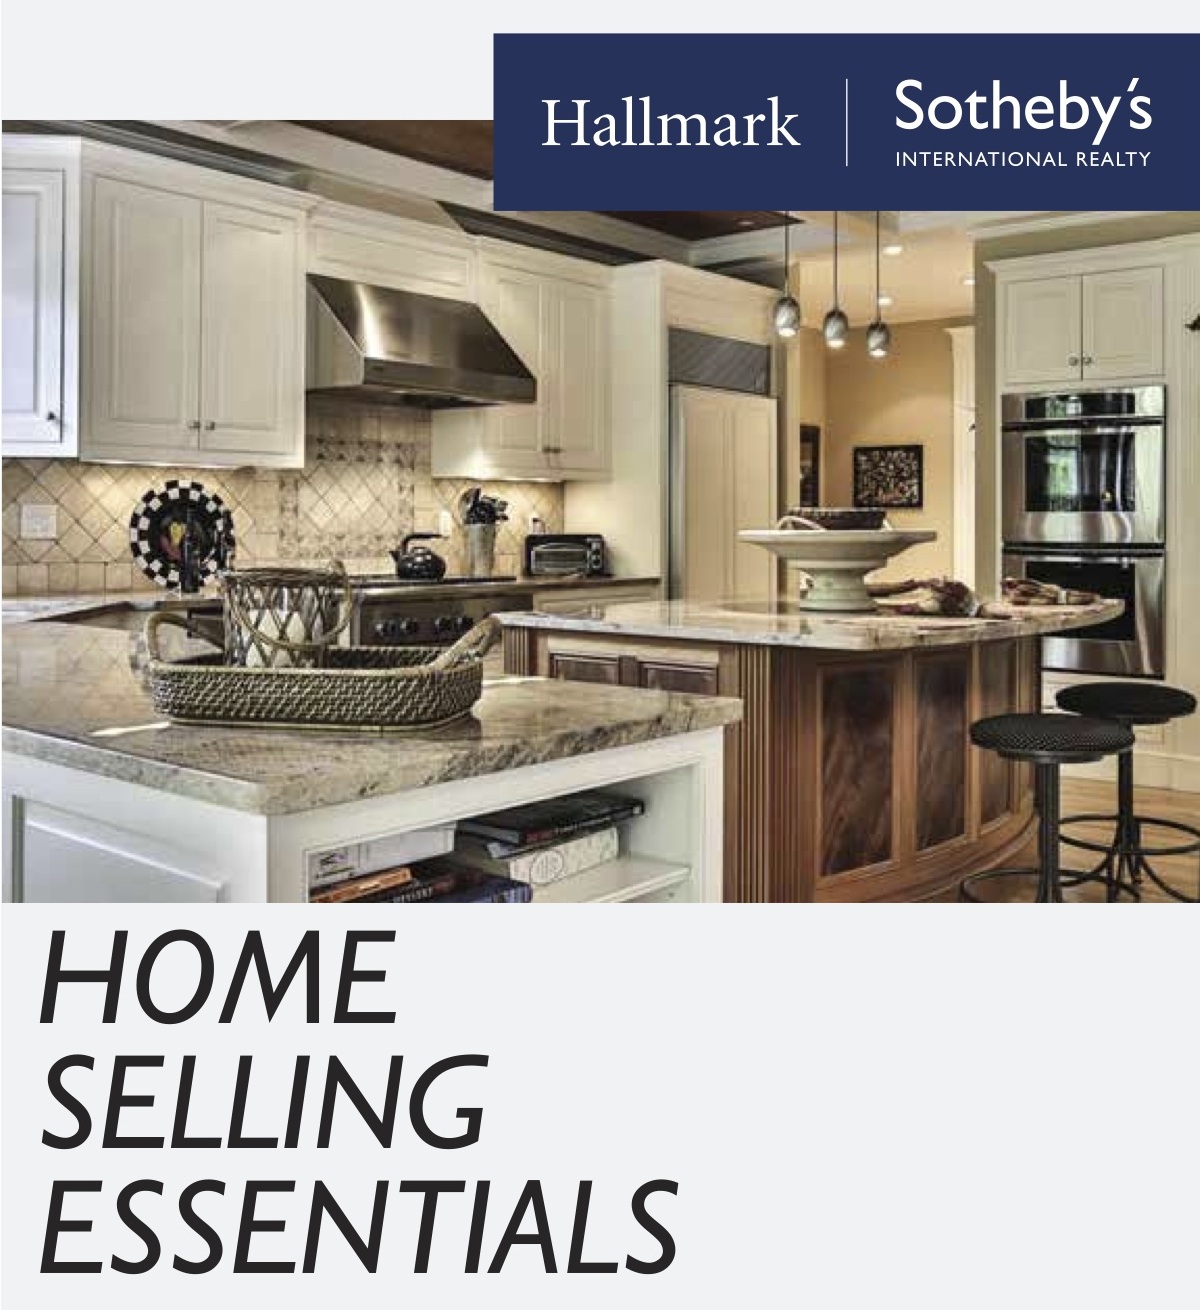 Home selling essential